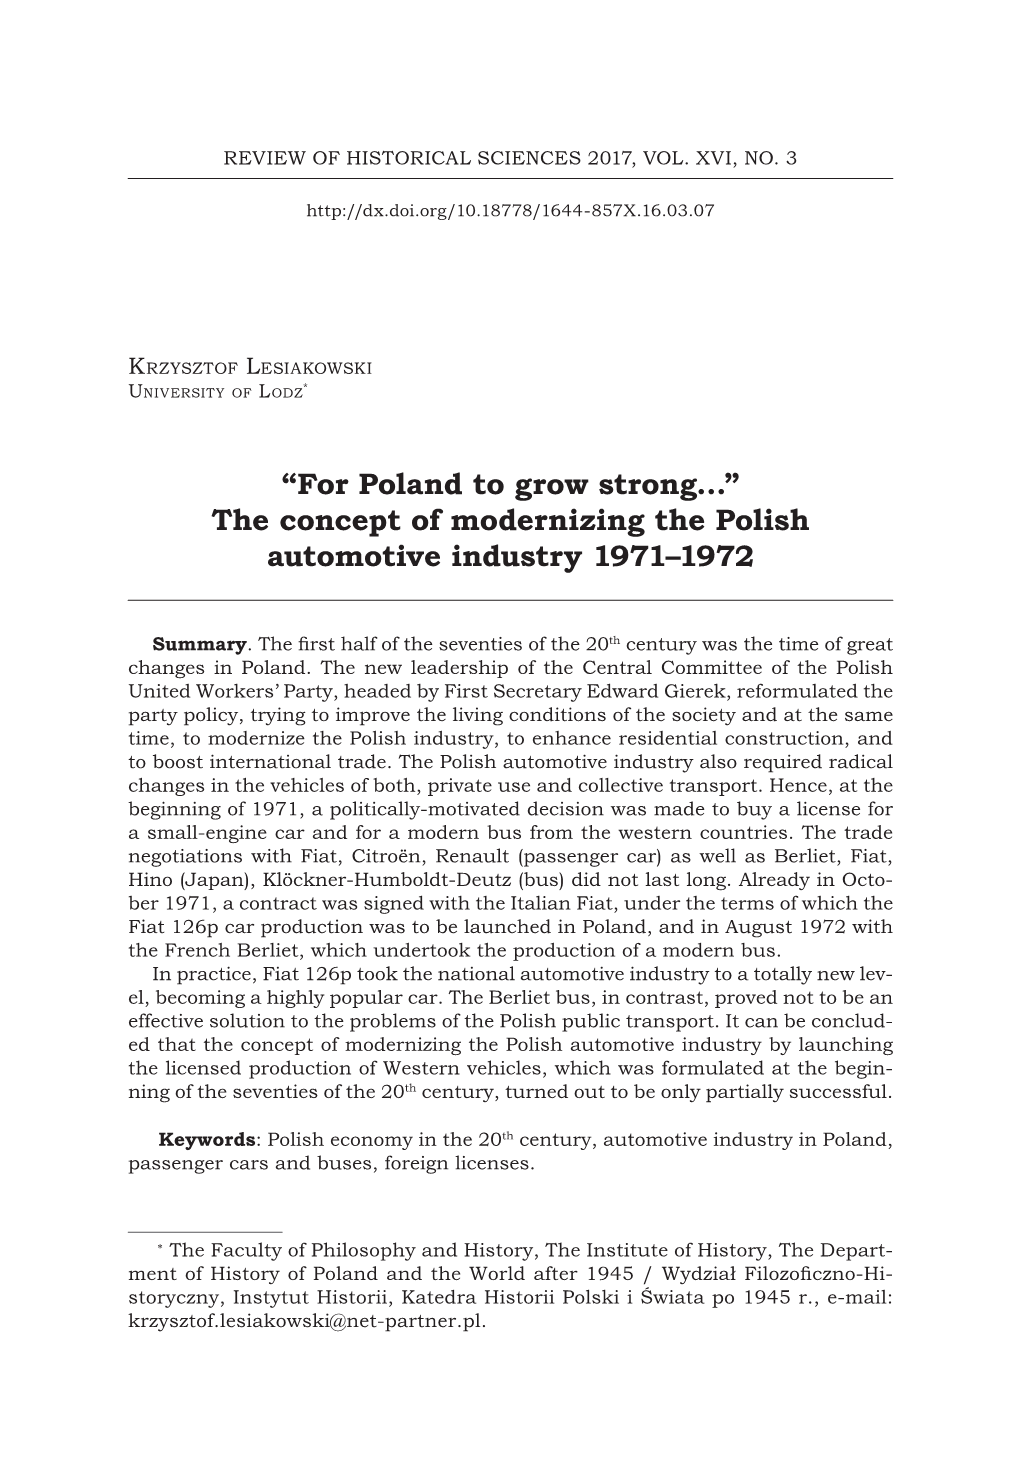 “For Poland to Grow Strong…” the Concept of Modernizing the Polish Automotive Industry 1971–1972